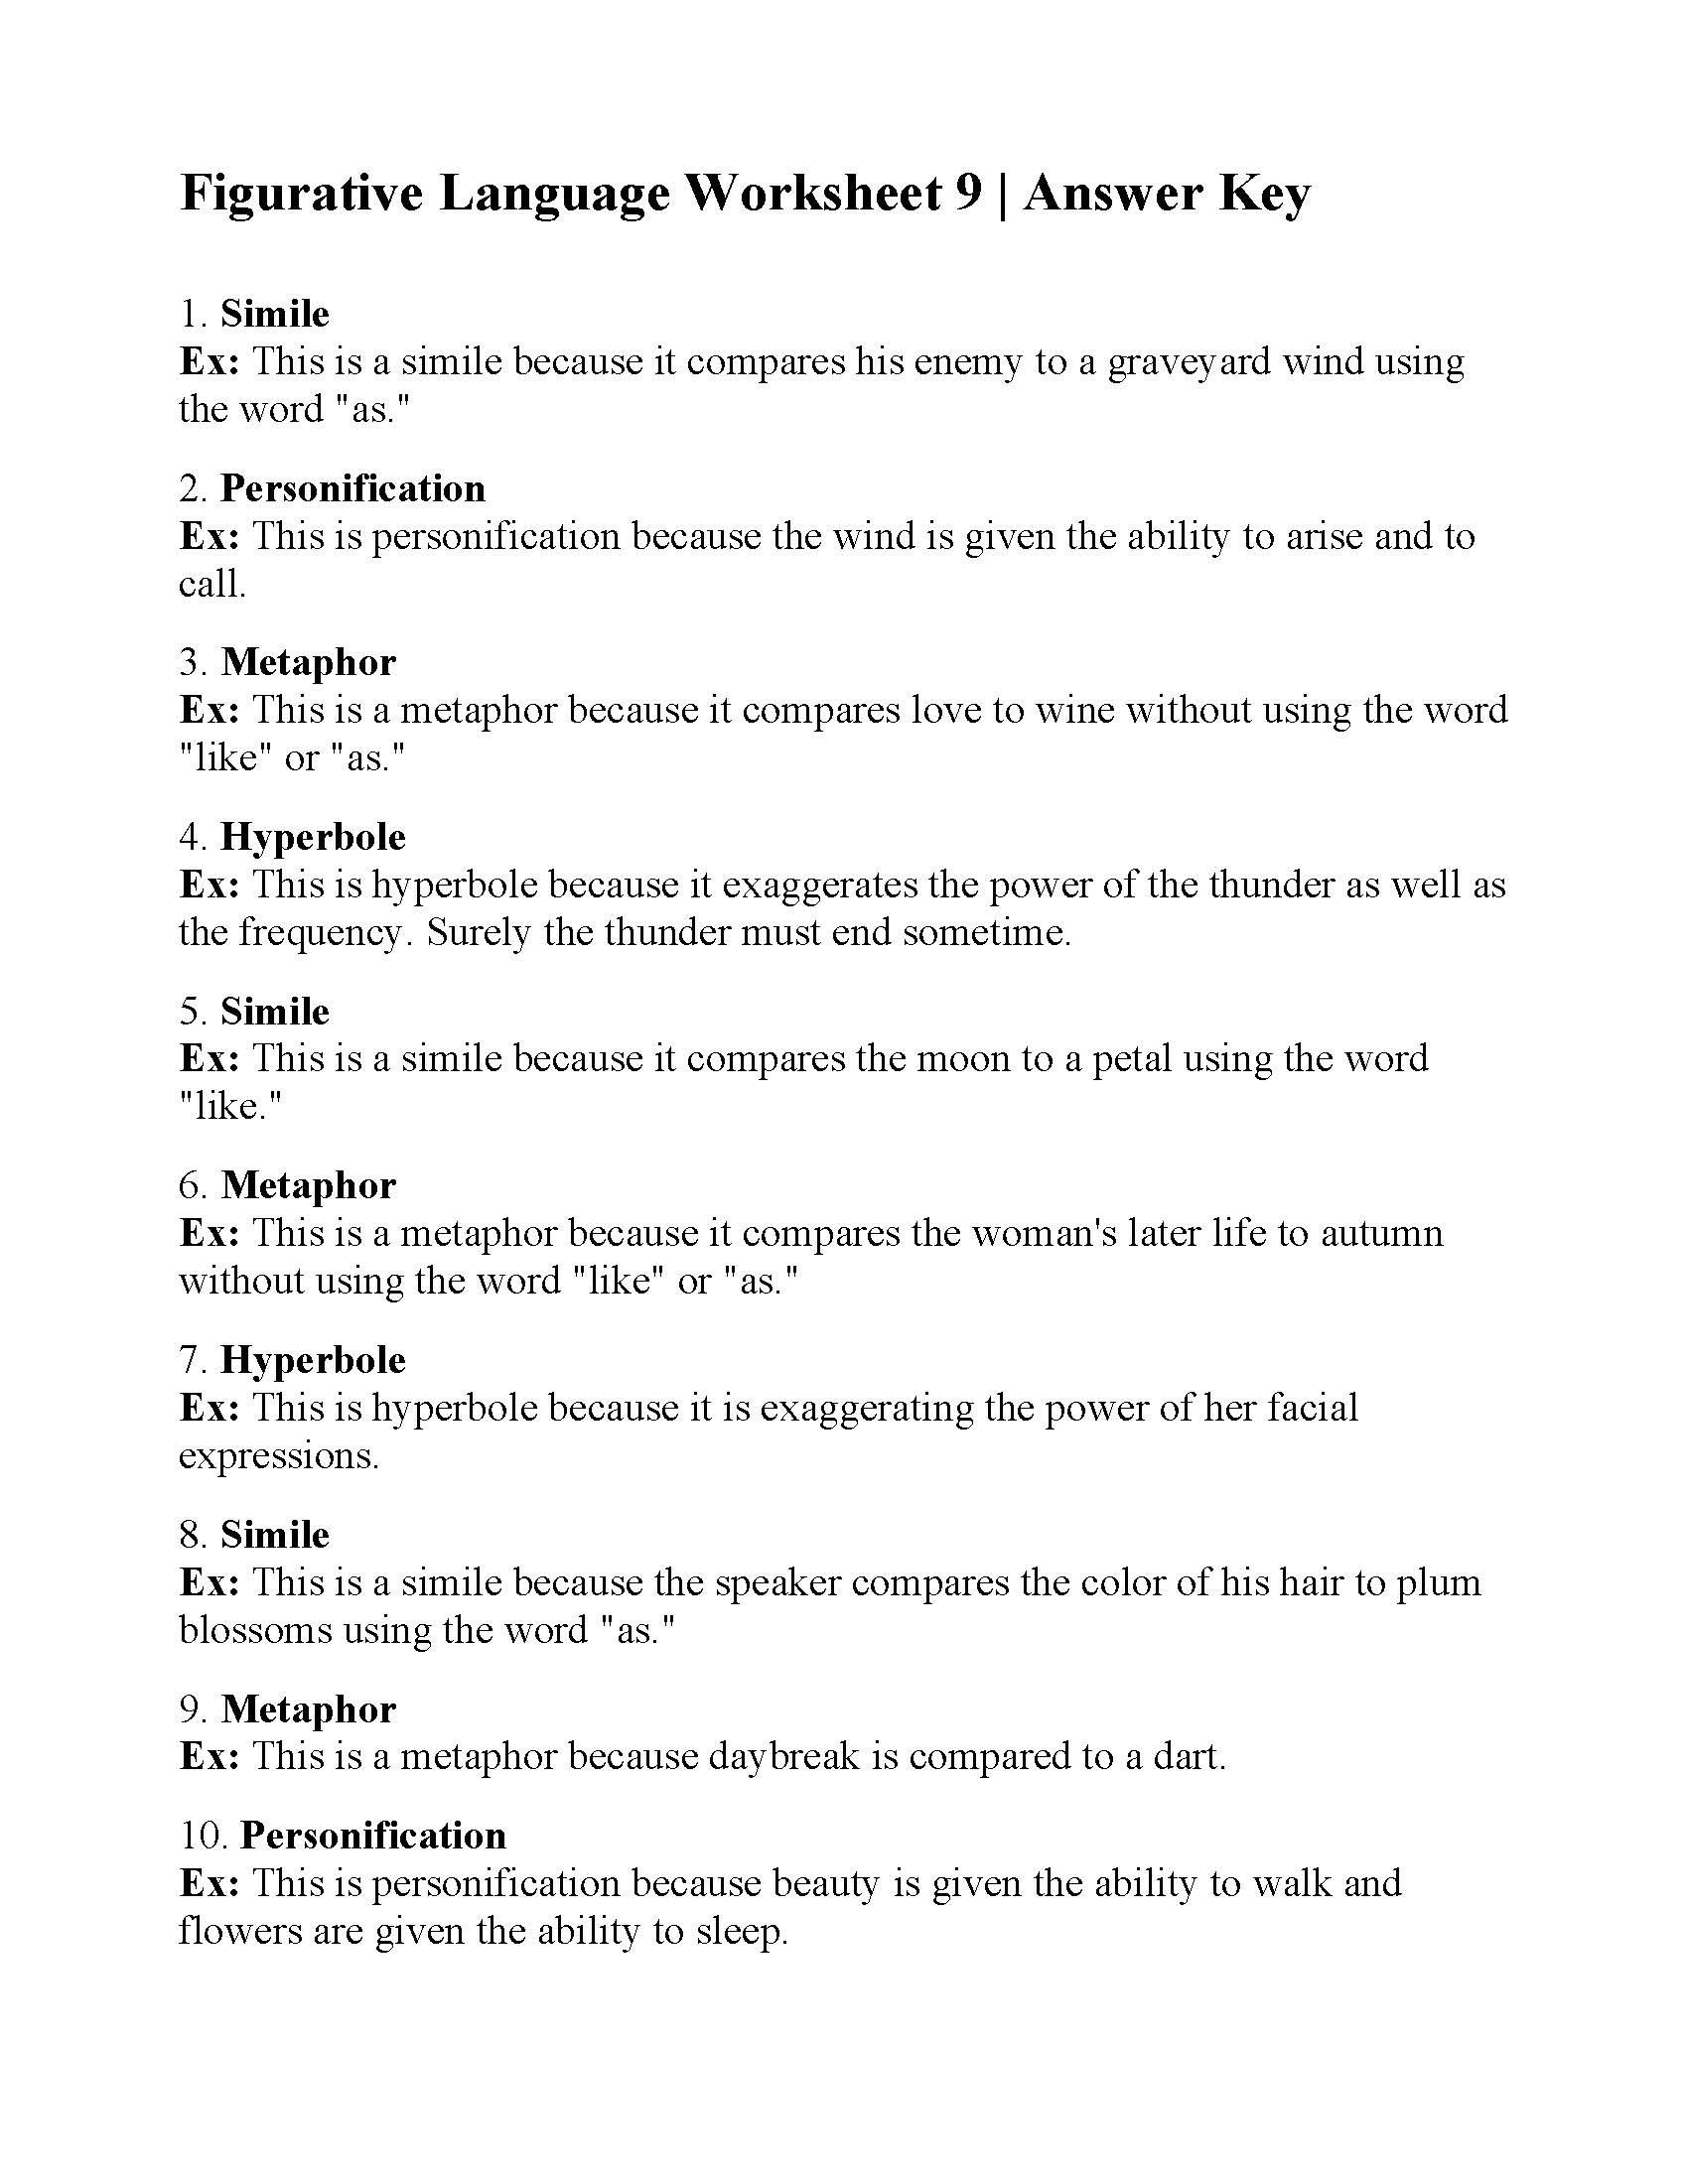 Personification Worksheets 6th Grade Figurative Language Worksheet 9